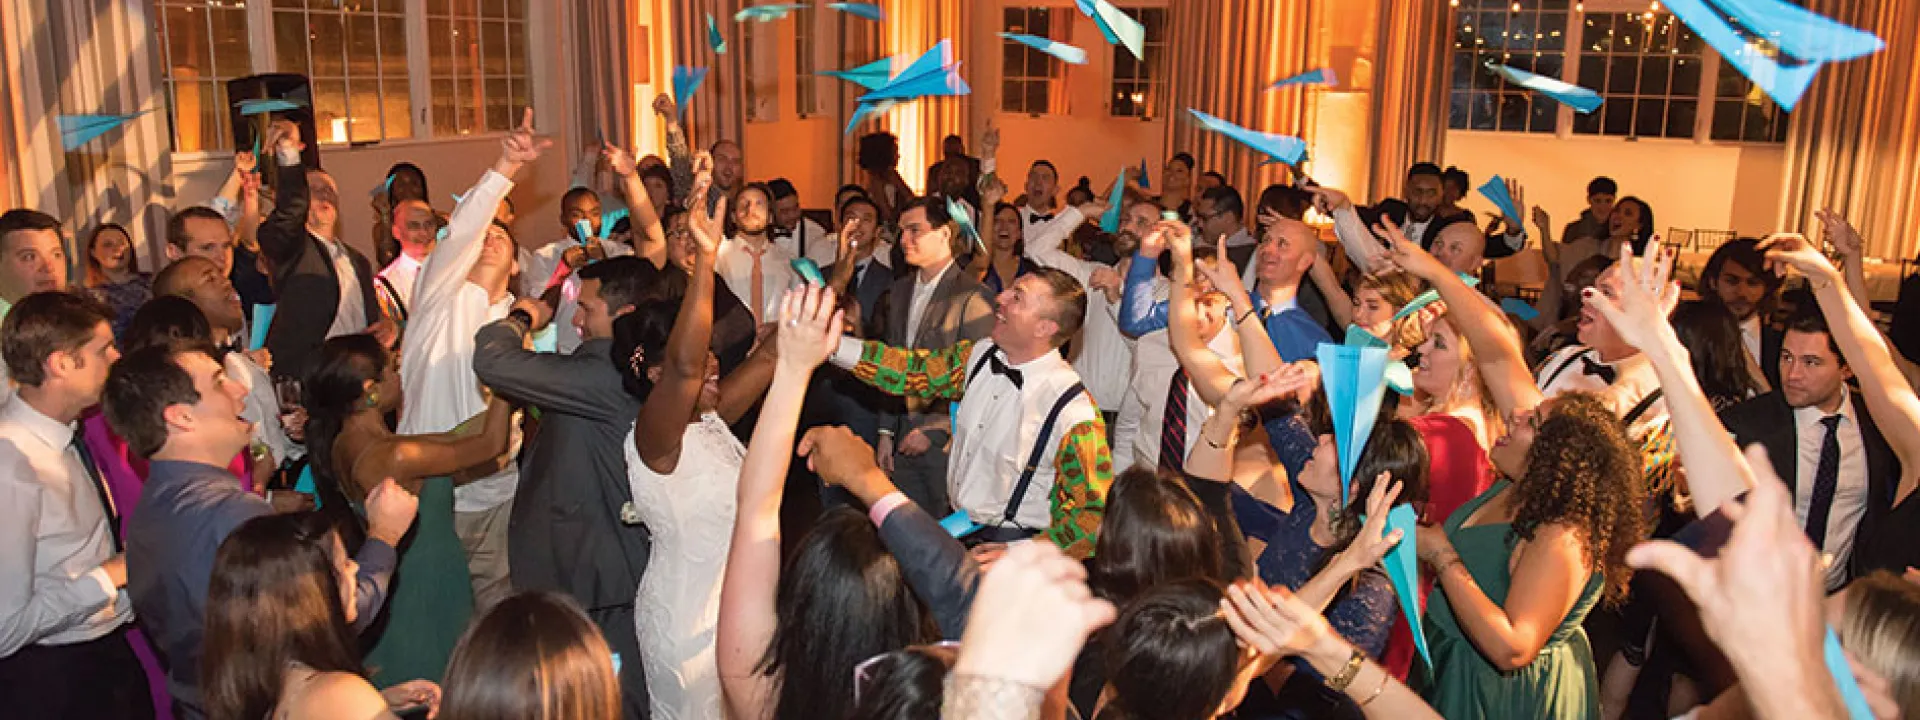 A paper-airplane toss at this travel-themed wedding lent a fun moment to the dance party.